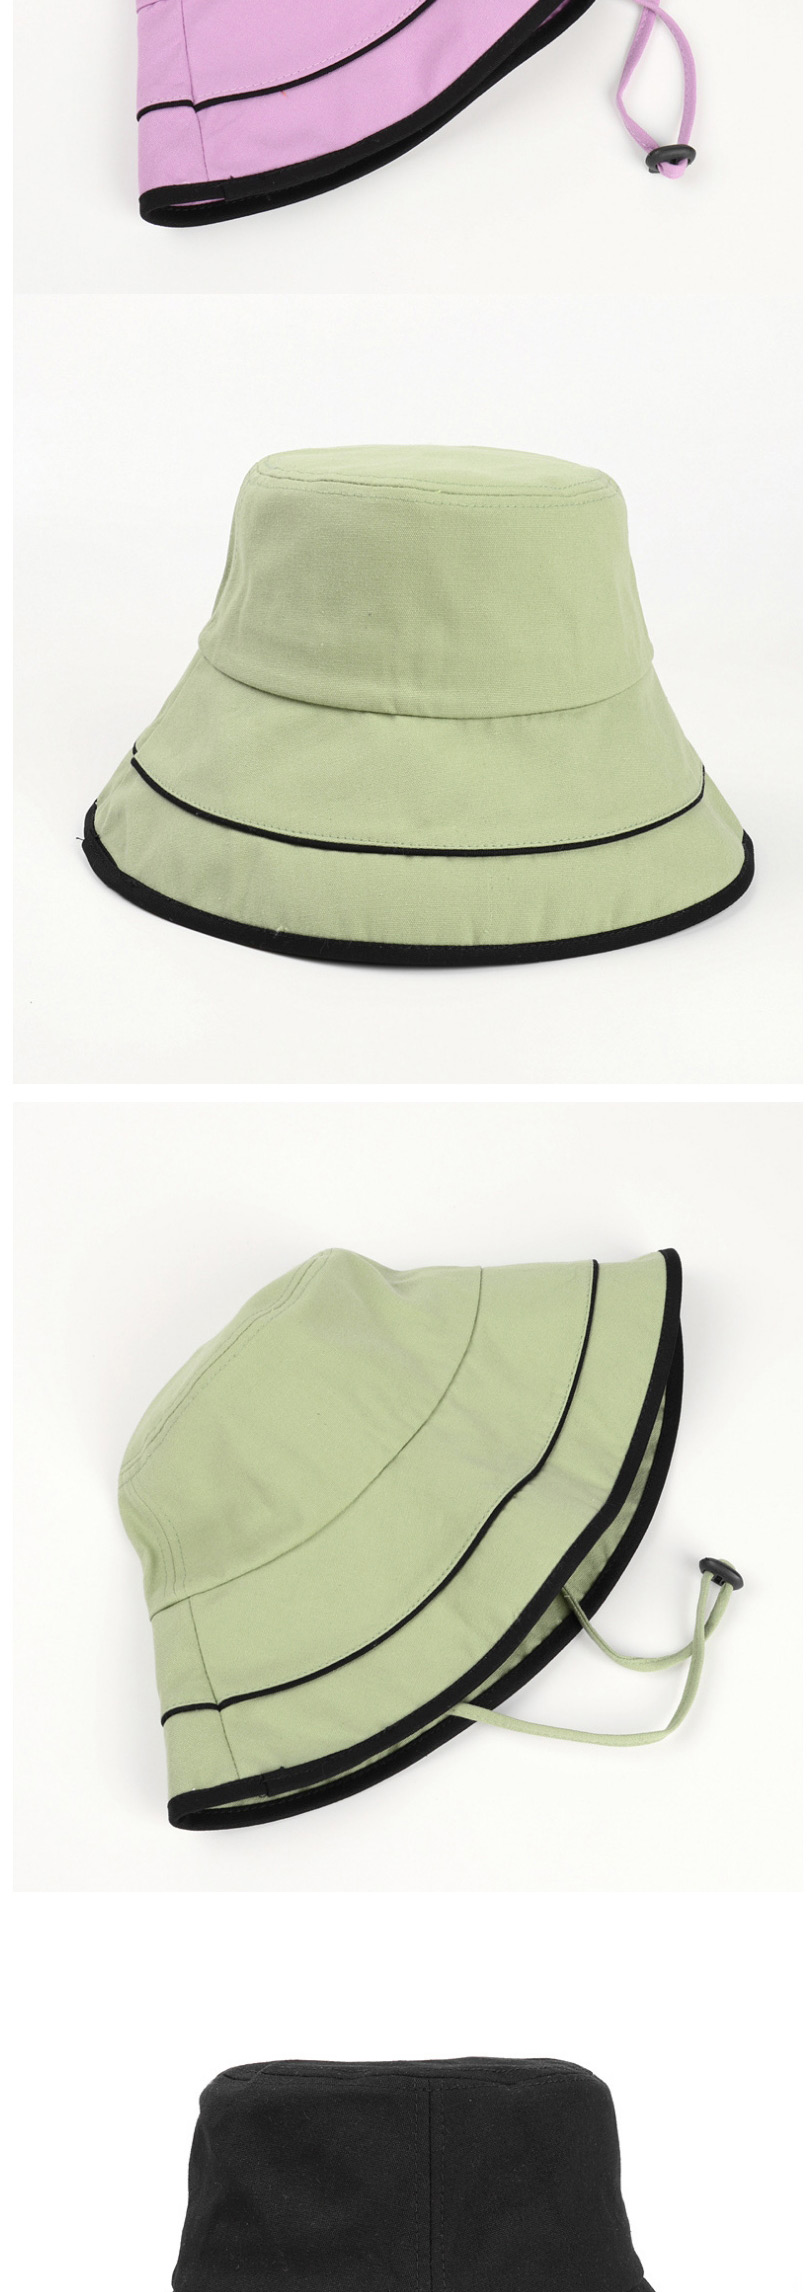 Fashion Khaki (with Windproof Rope) Folded Double Layer Stitching Contrast Color Fisherman Hat,Sun Hats